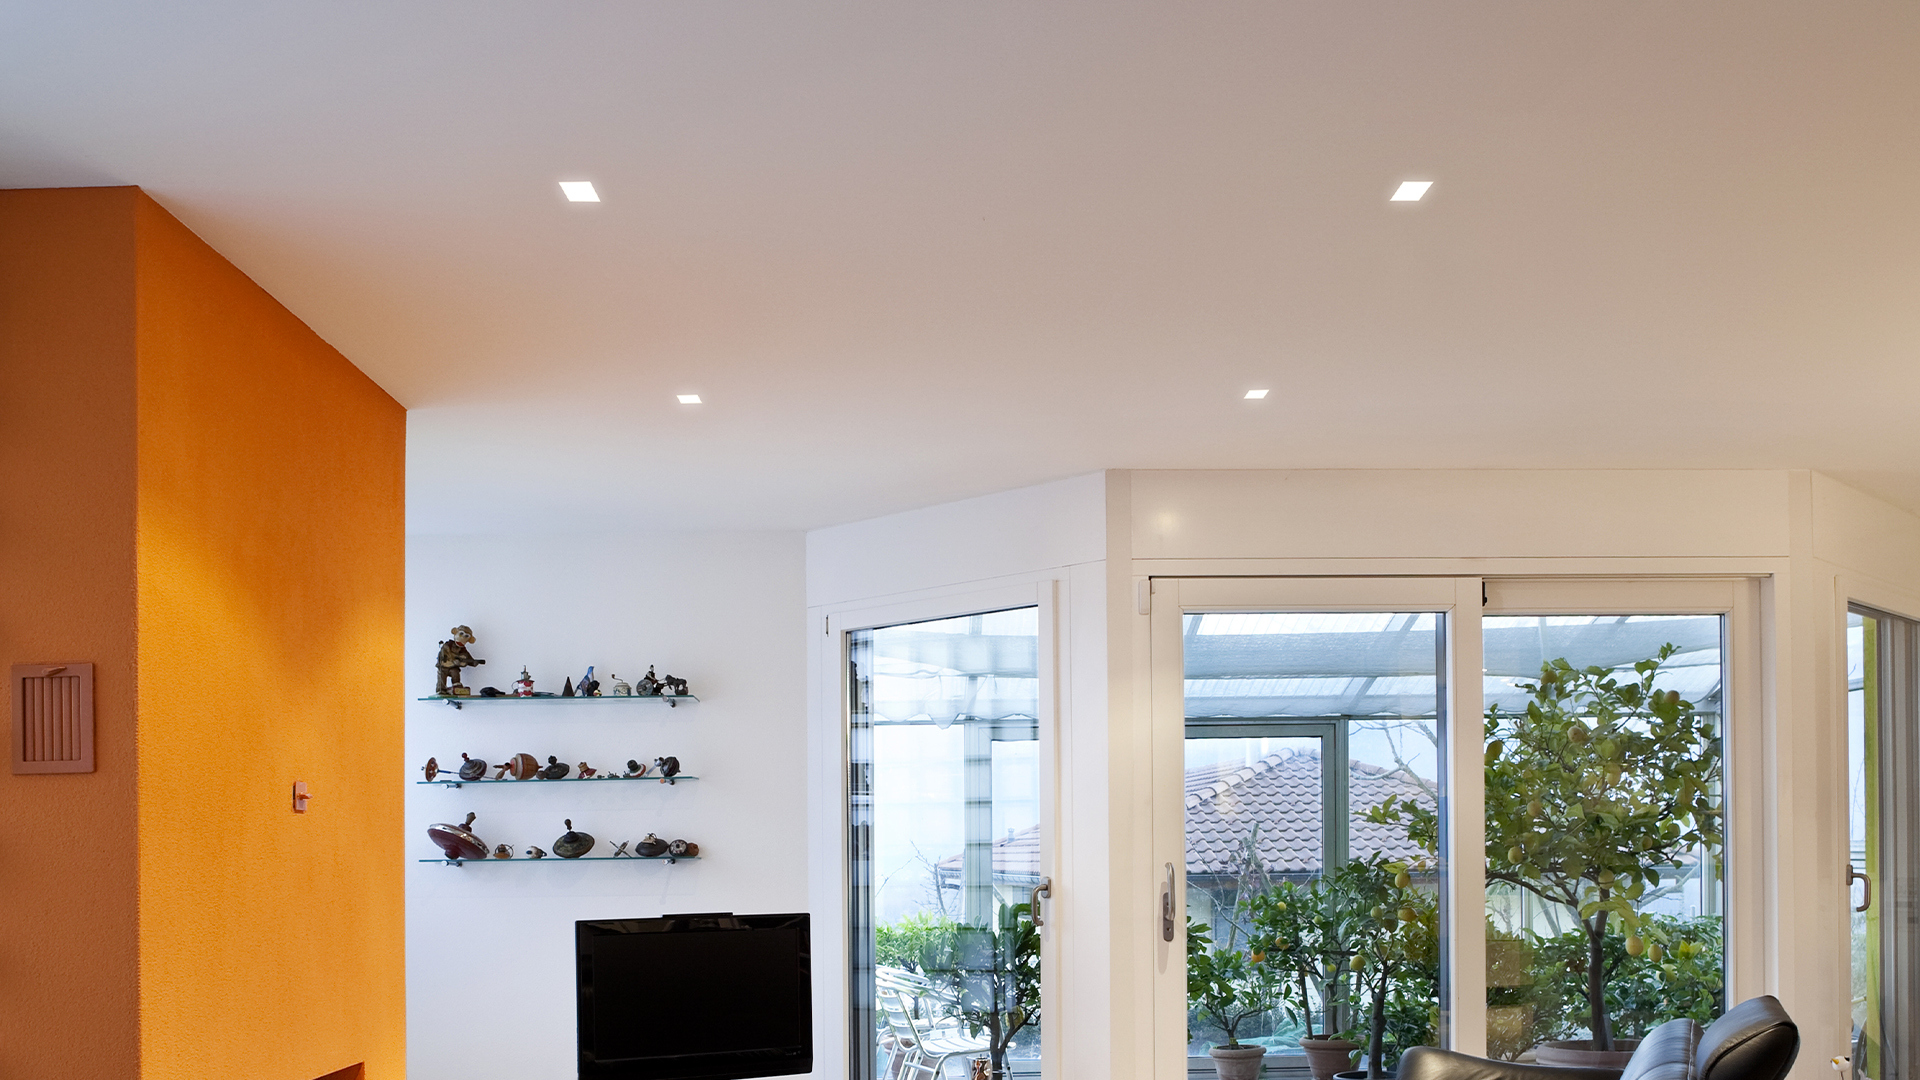 How many Lumens do you need to light your home?